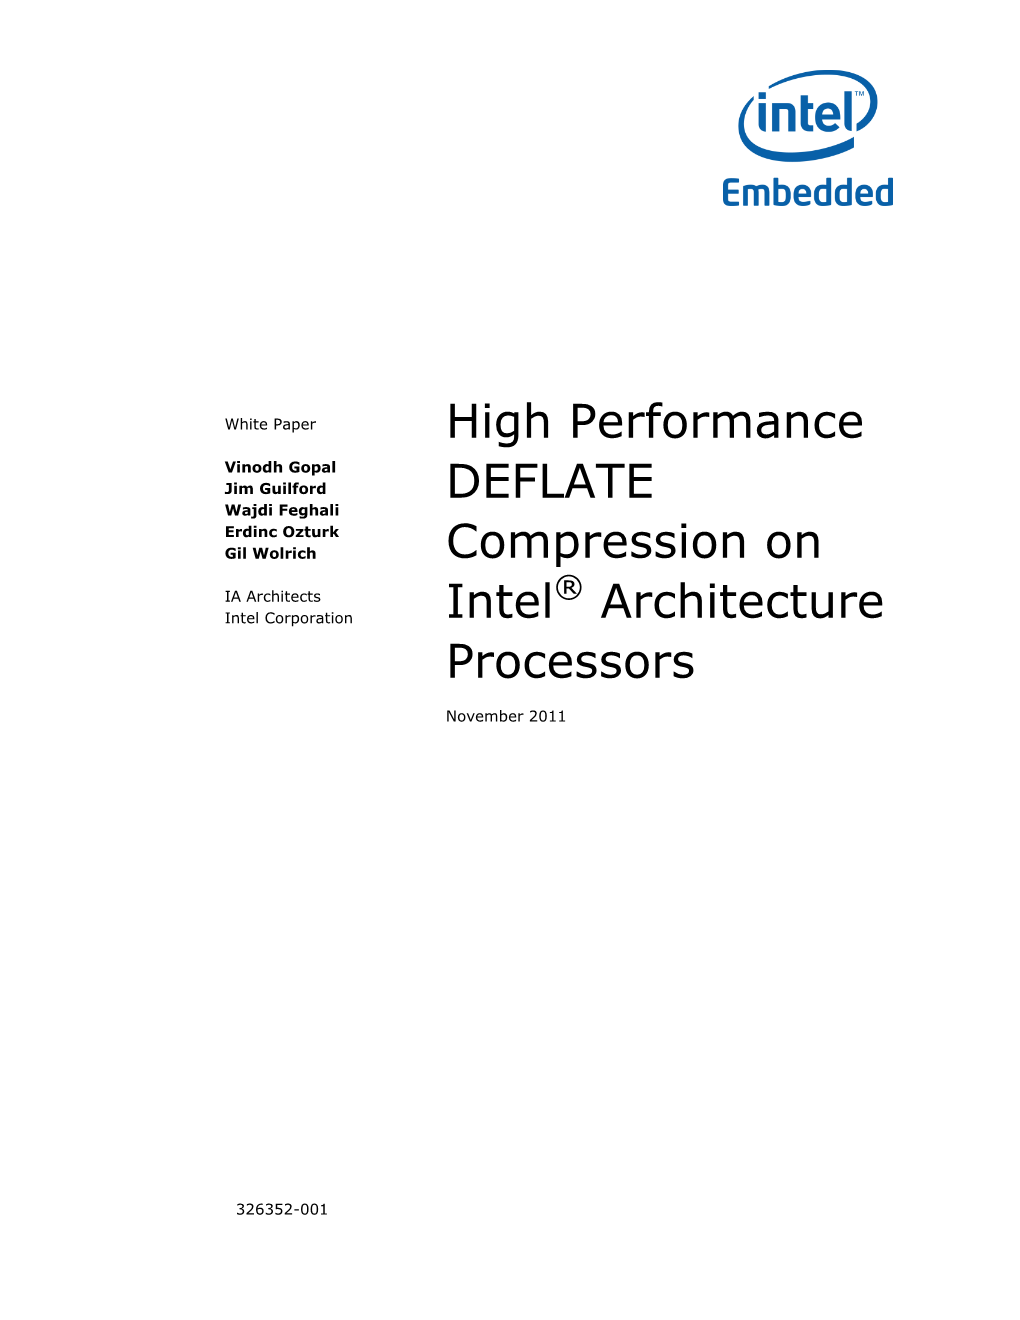 High Performance DEFLATE Compression on Intel® Architecture Processors